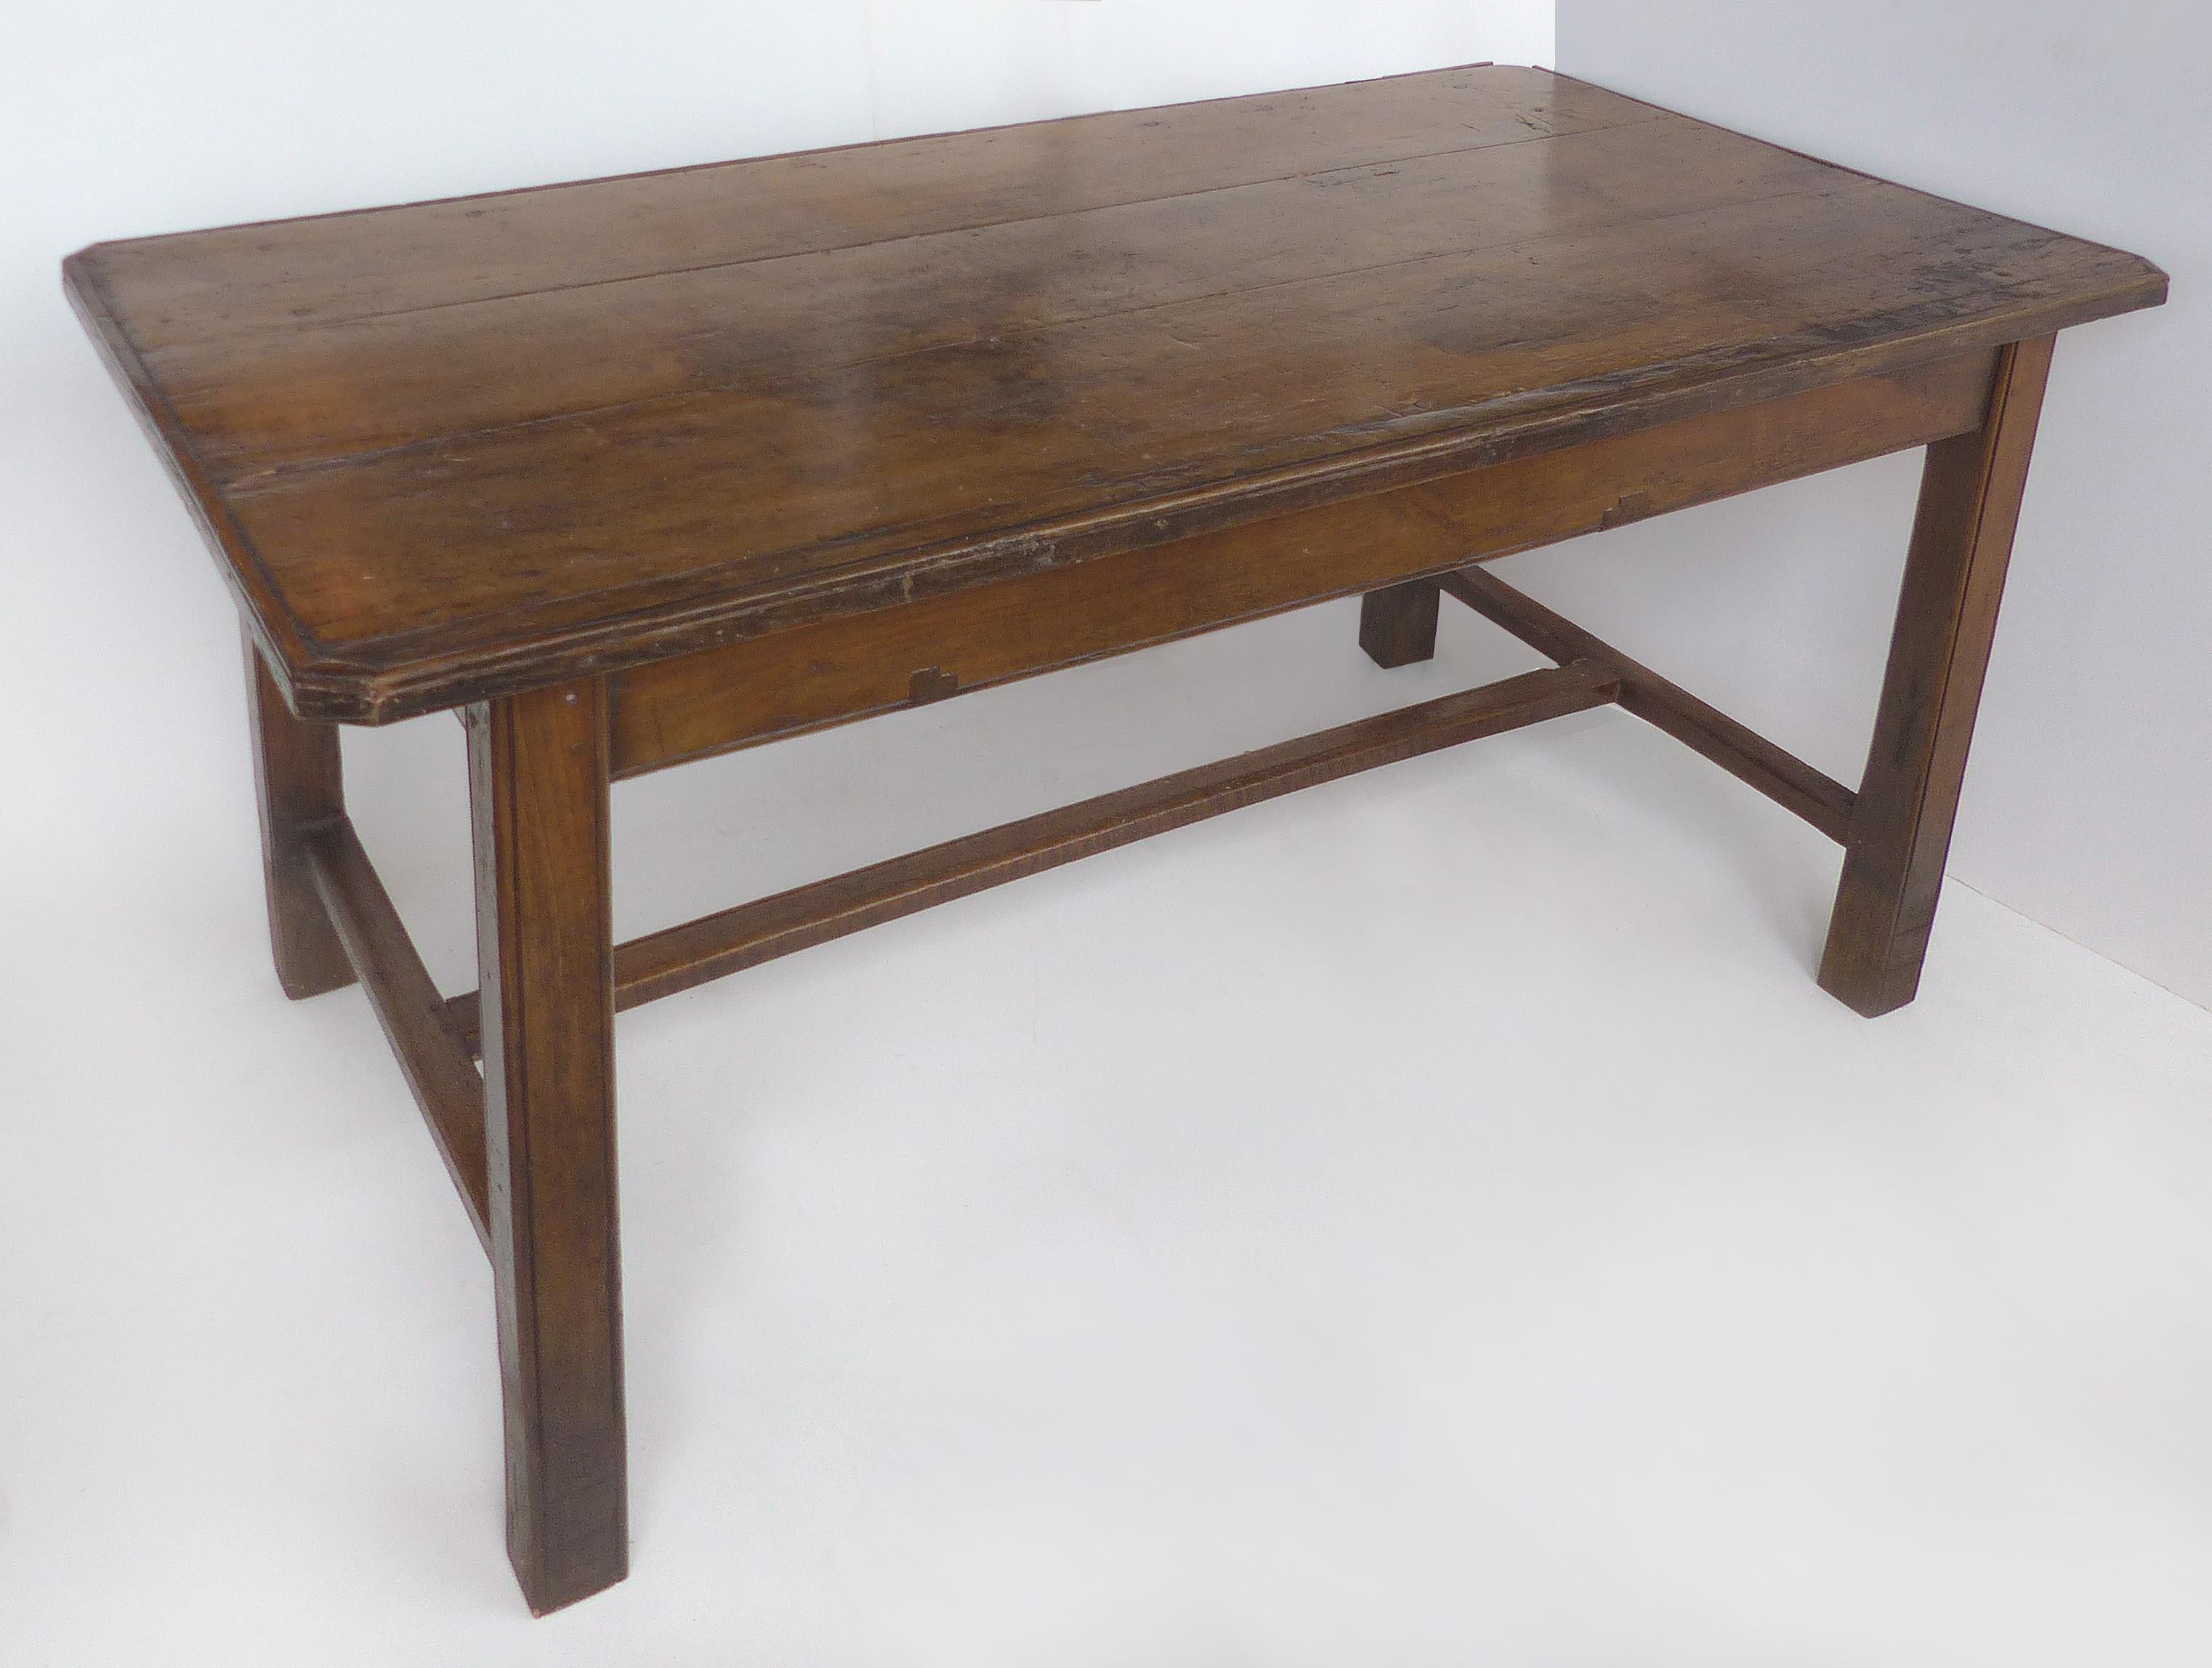 Rustic Antique Farm Work Table or Desk with Drawers

Offered for sale is an antique, rustic farm work table with two drawers. The table has been used as a desk as it has a slender slightly off-set drawer on the side and an additional drawer at one